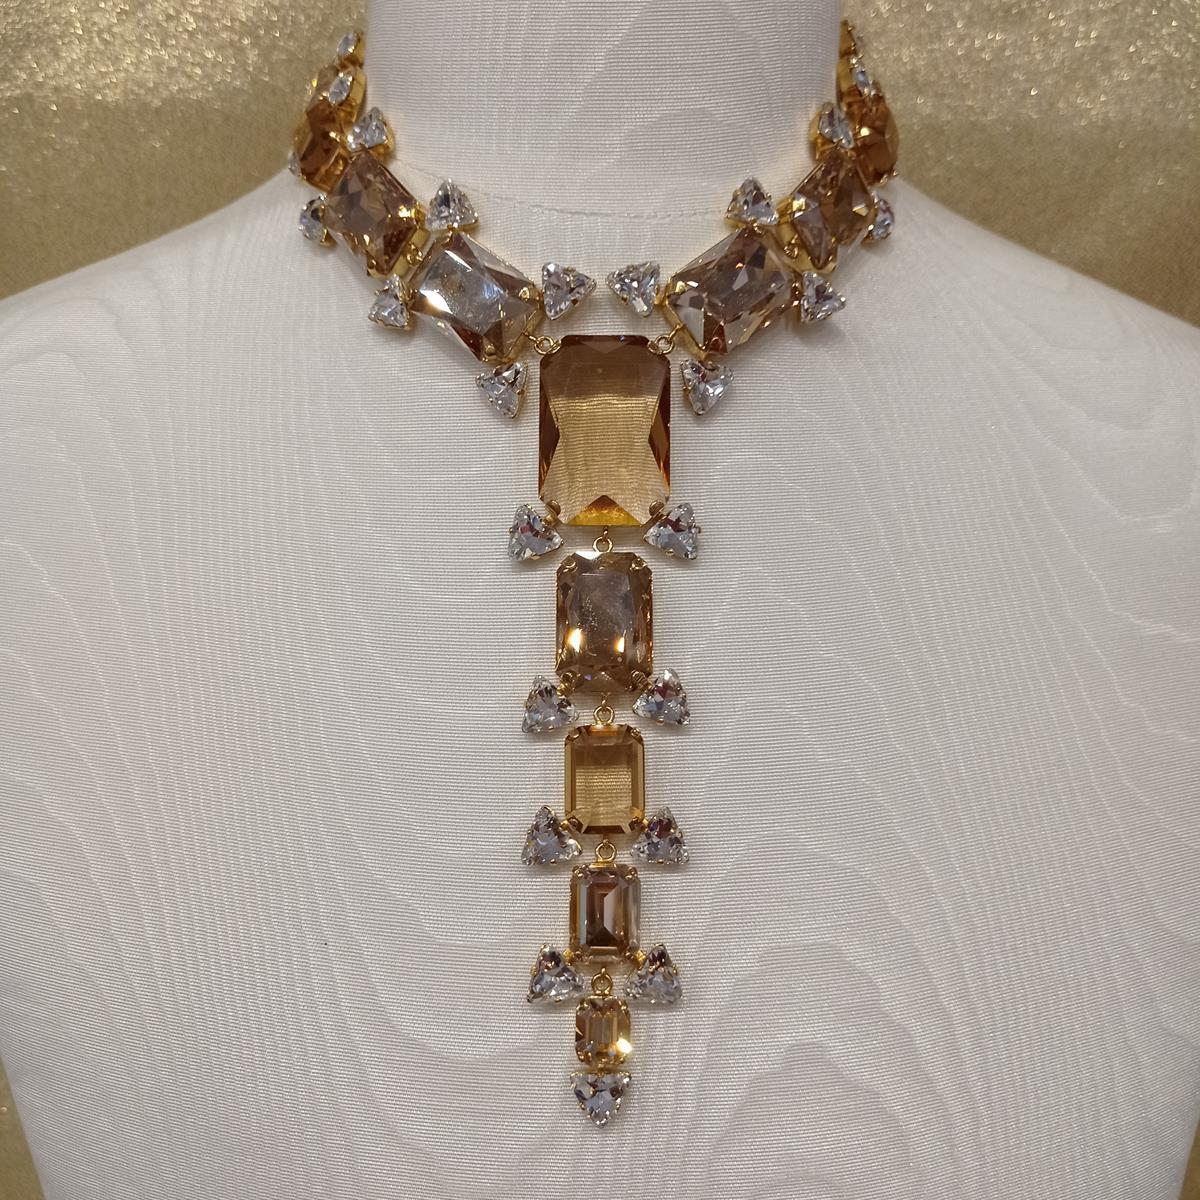 Fantastic masterpiece by Carlo Zini
One of the world greatest bijoux designers
Choker
Champagne colored crystals
White zyrcons
Non allergenic brass, 18 Kt, 3 micron gold dipped
100% Artisanal work made in Milano
Worldwide express shipping included